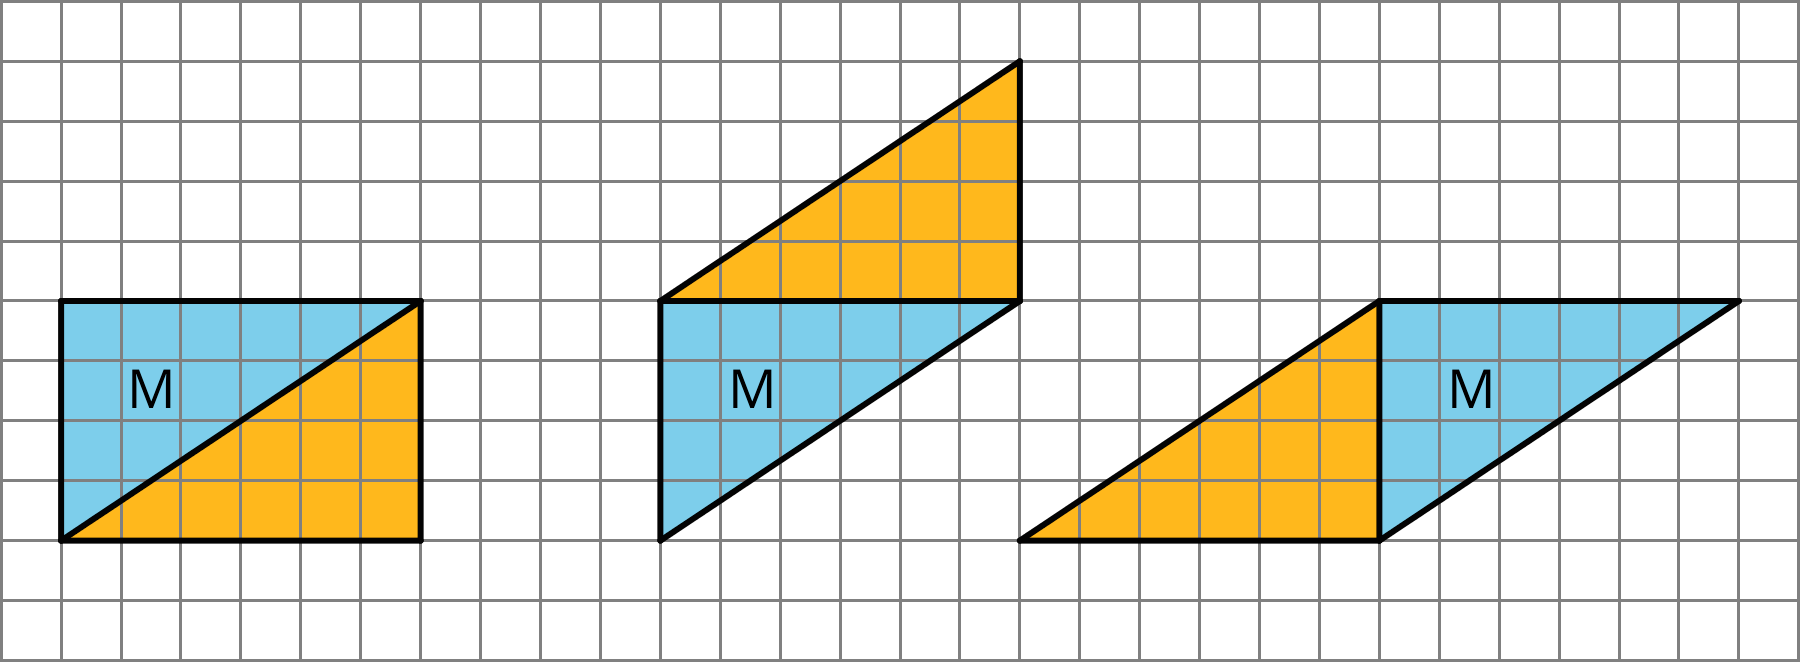 Three images of triangle M. The first image has a copy composed along the angled side of the triangle to compose a rectangle, the second has a copy along the top side of the triangle to compose a parallelogram, and the third has a copy along the left side of the triangle to compose a parallelogram.